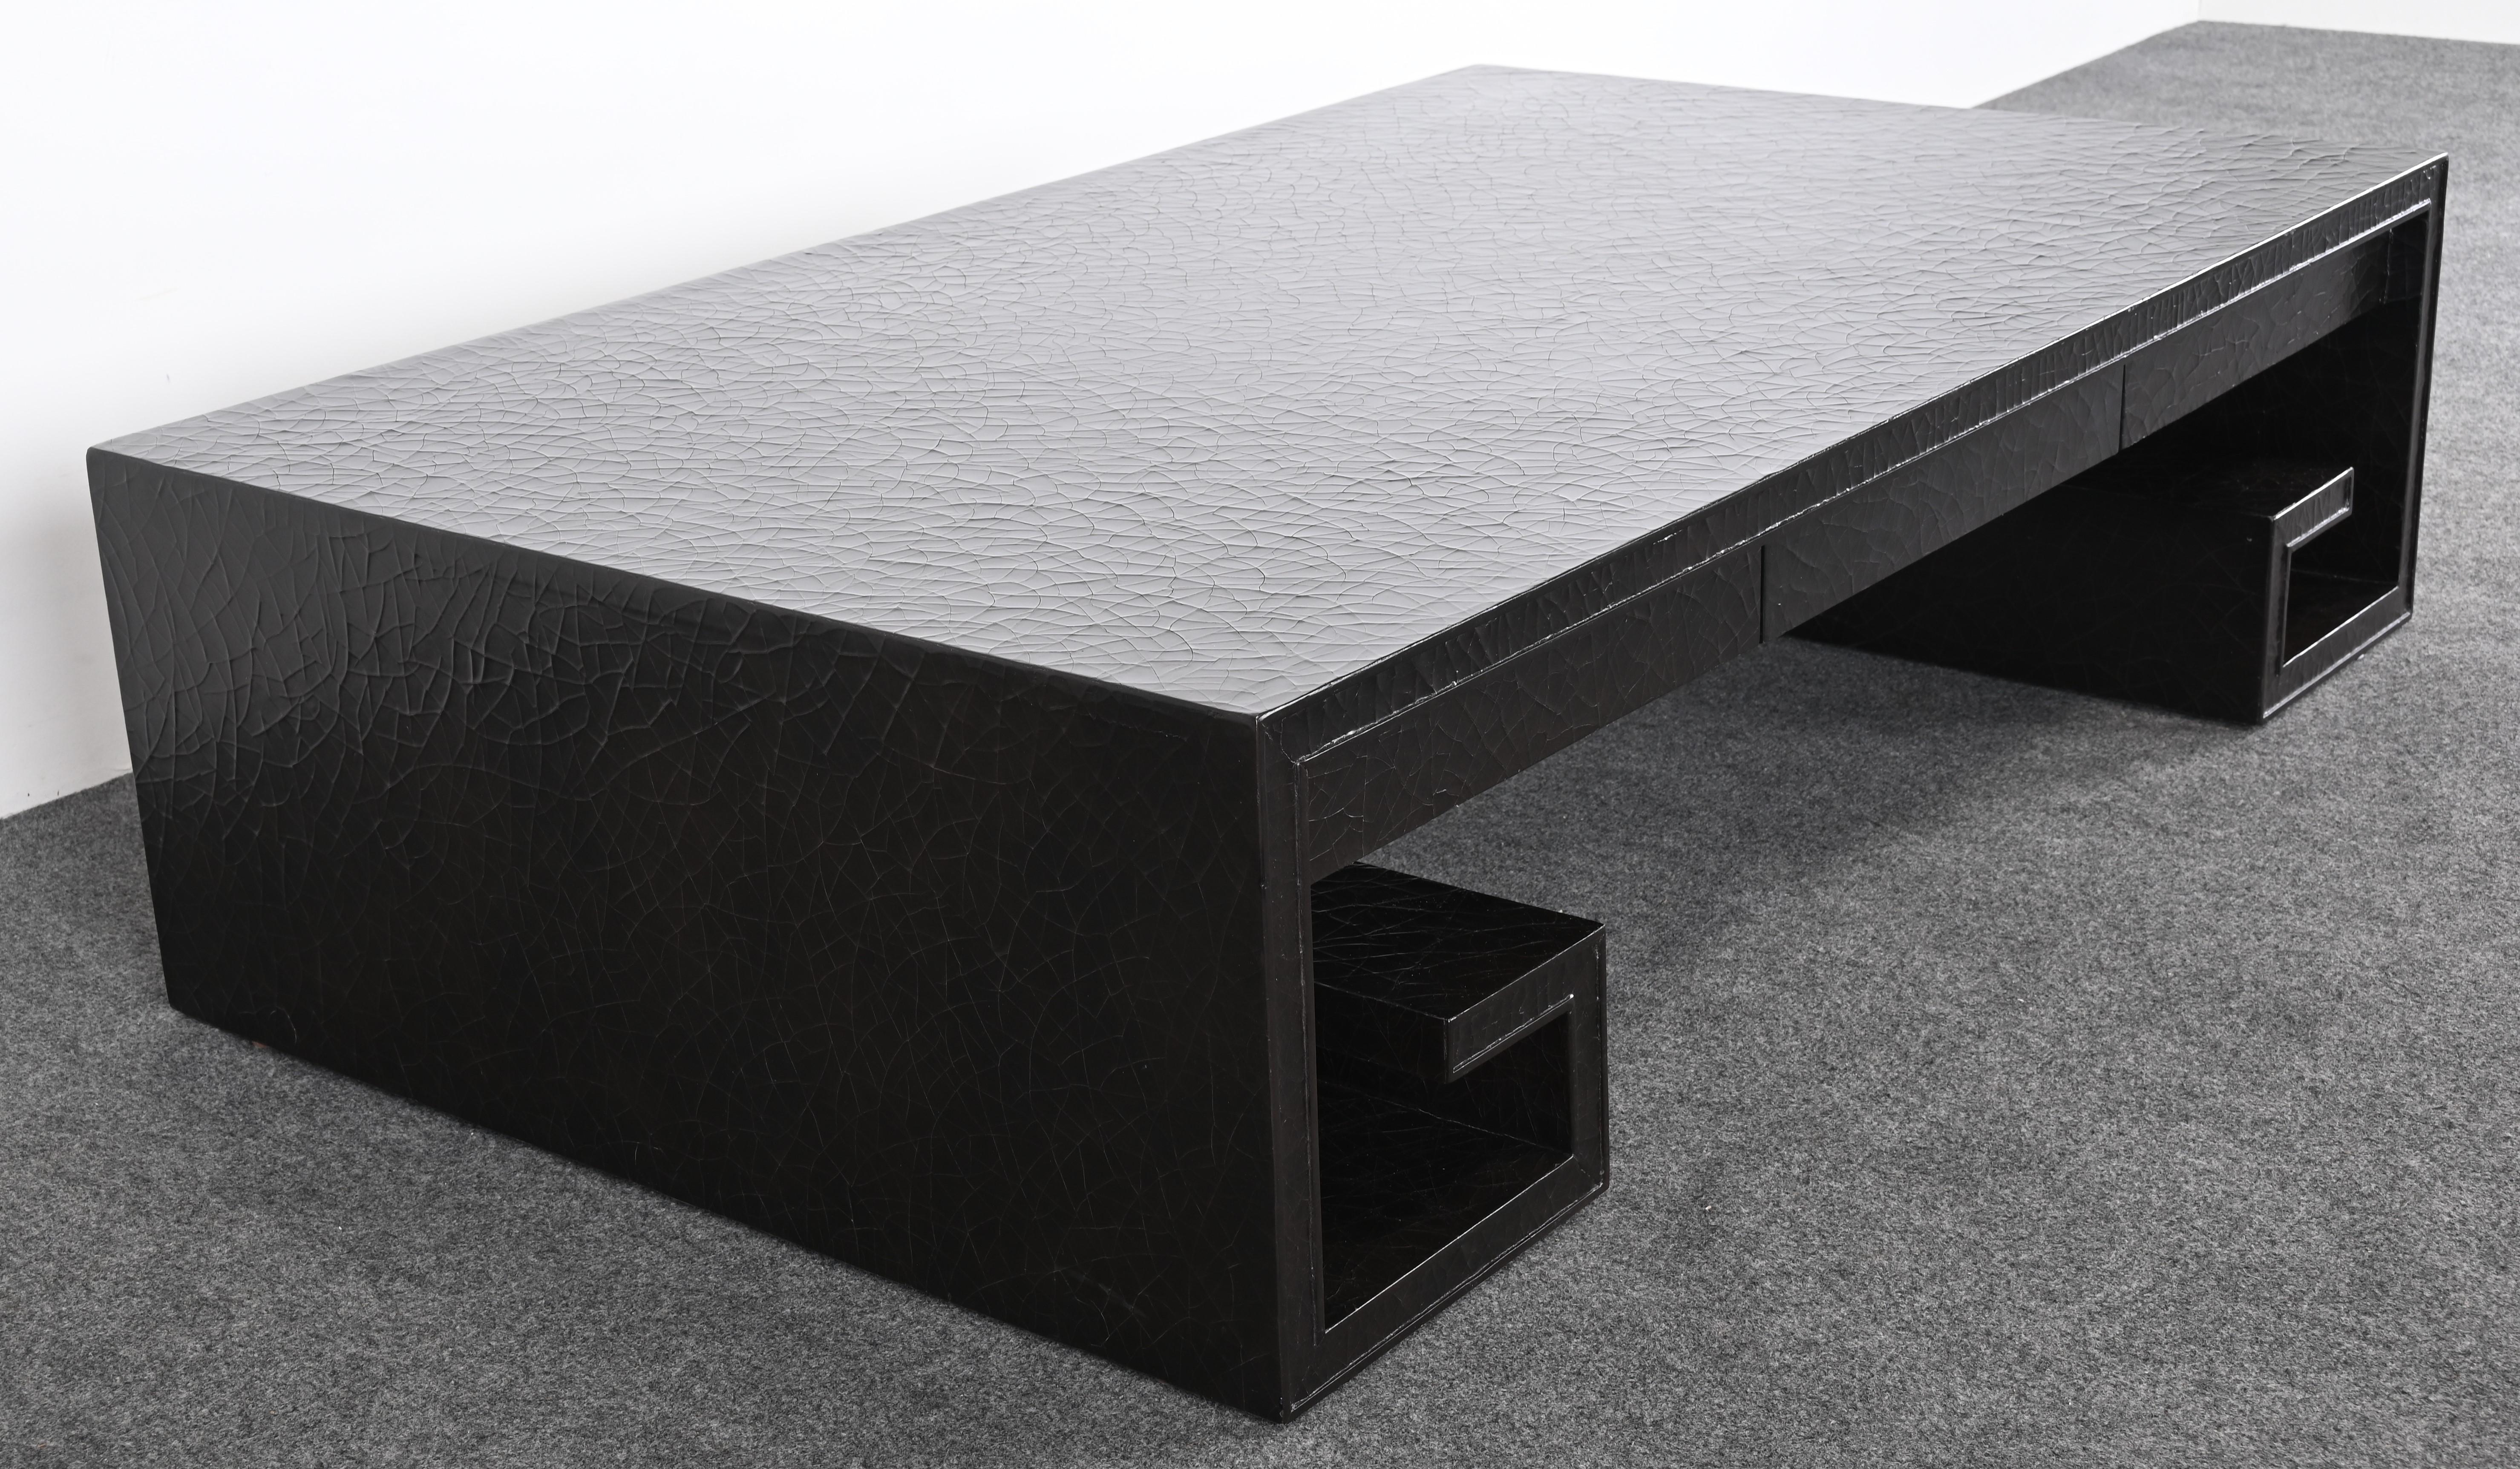 Lacquer Monumental Coffee Table by Thomas Pheasant for Baker, 1990s